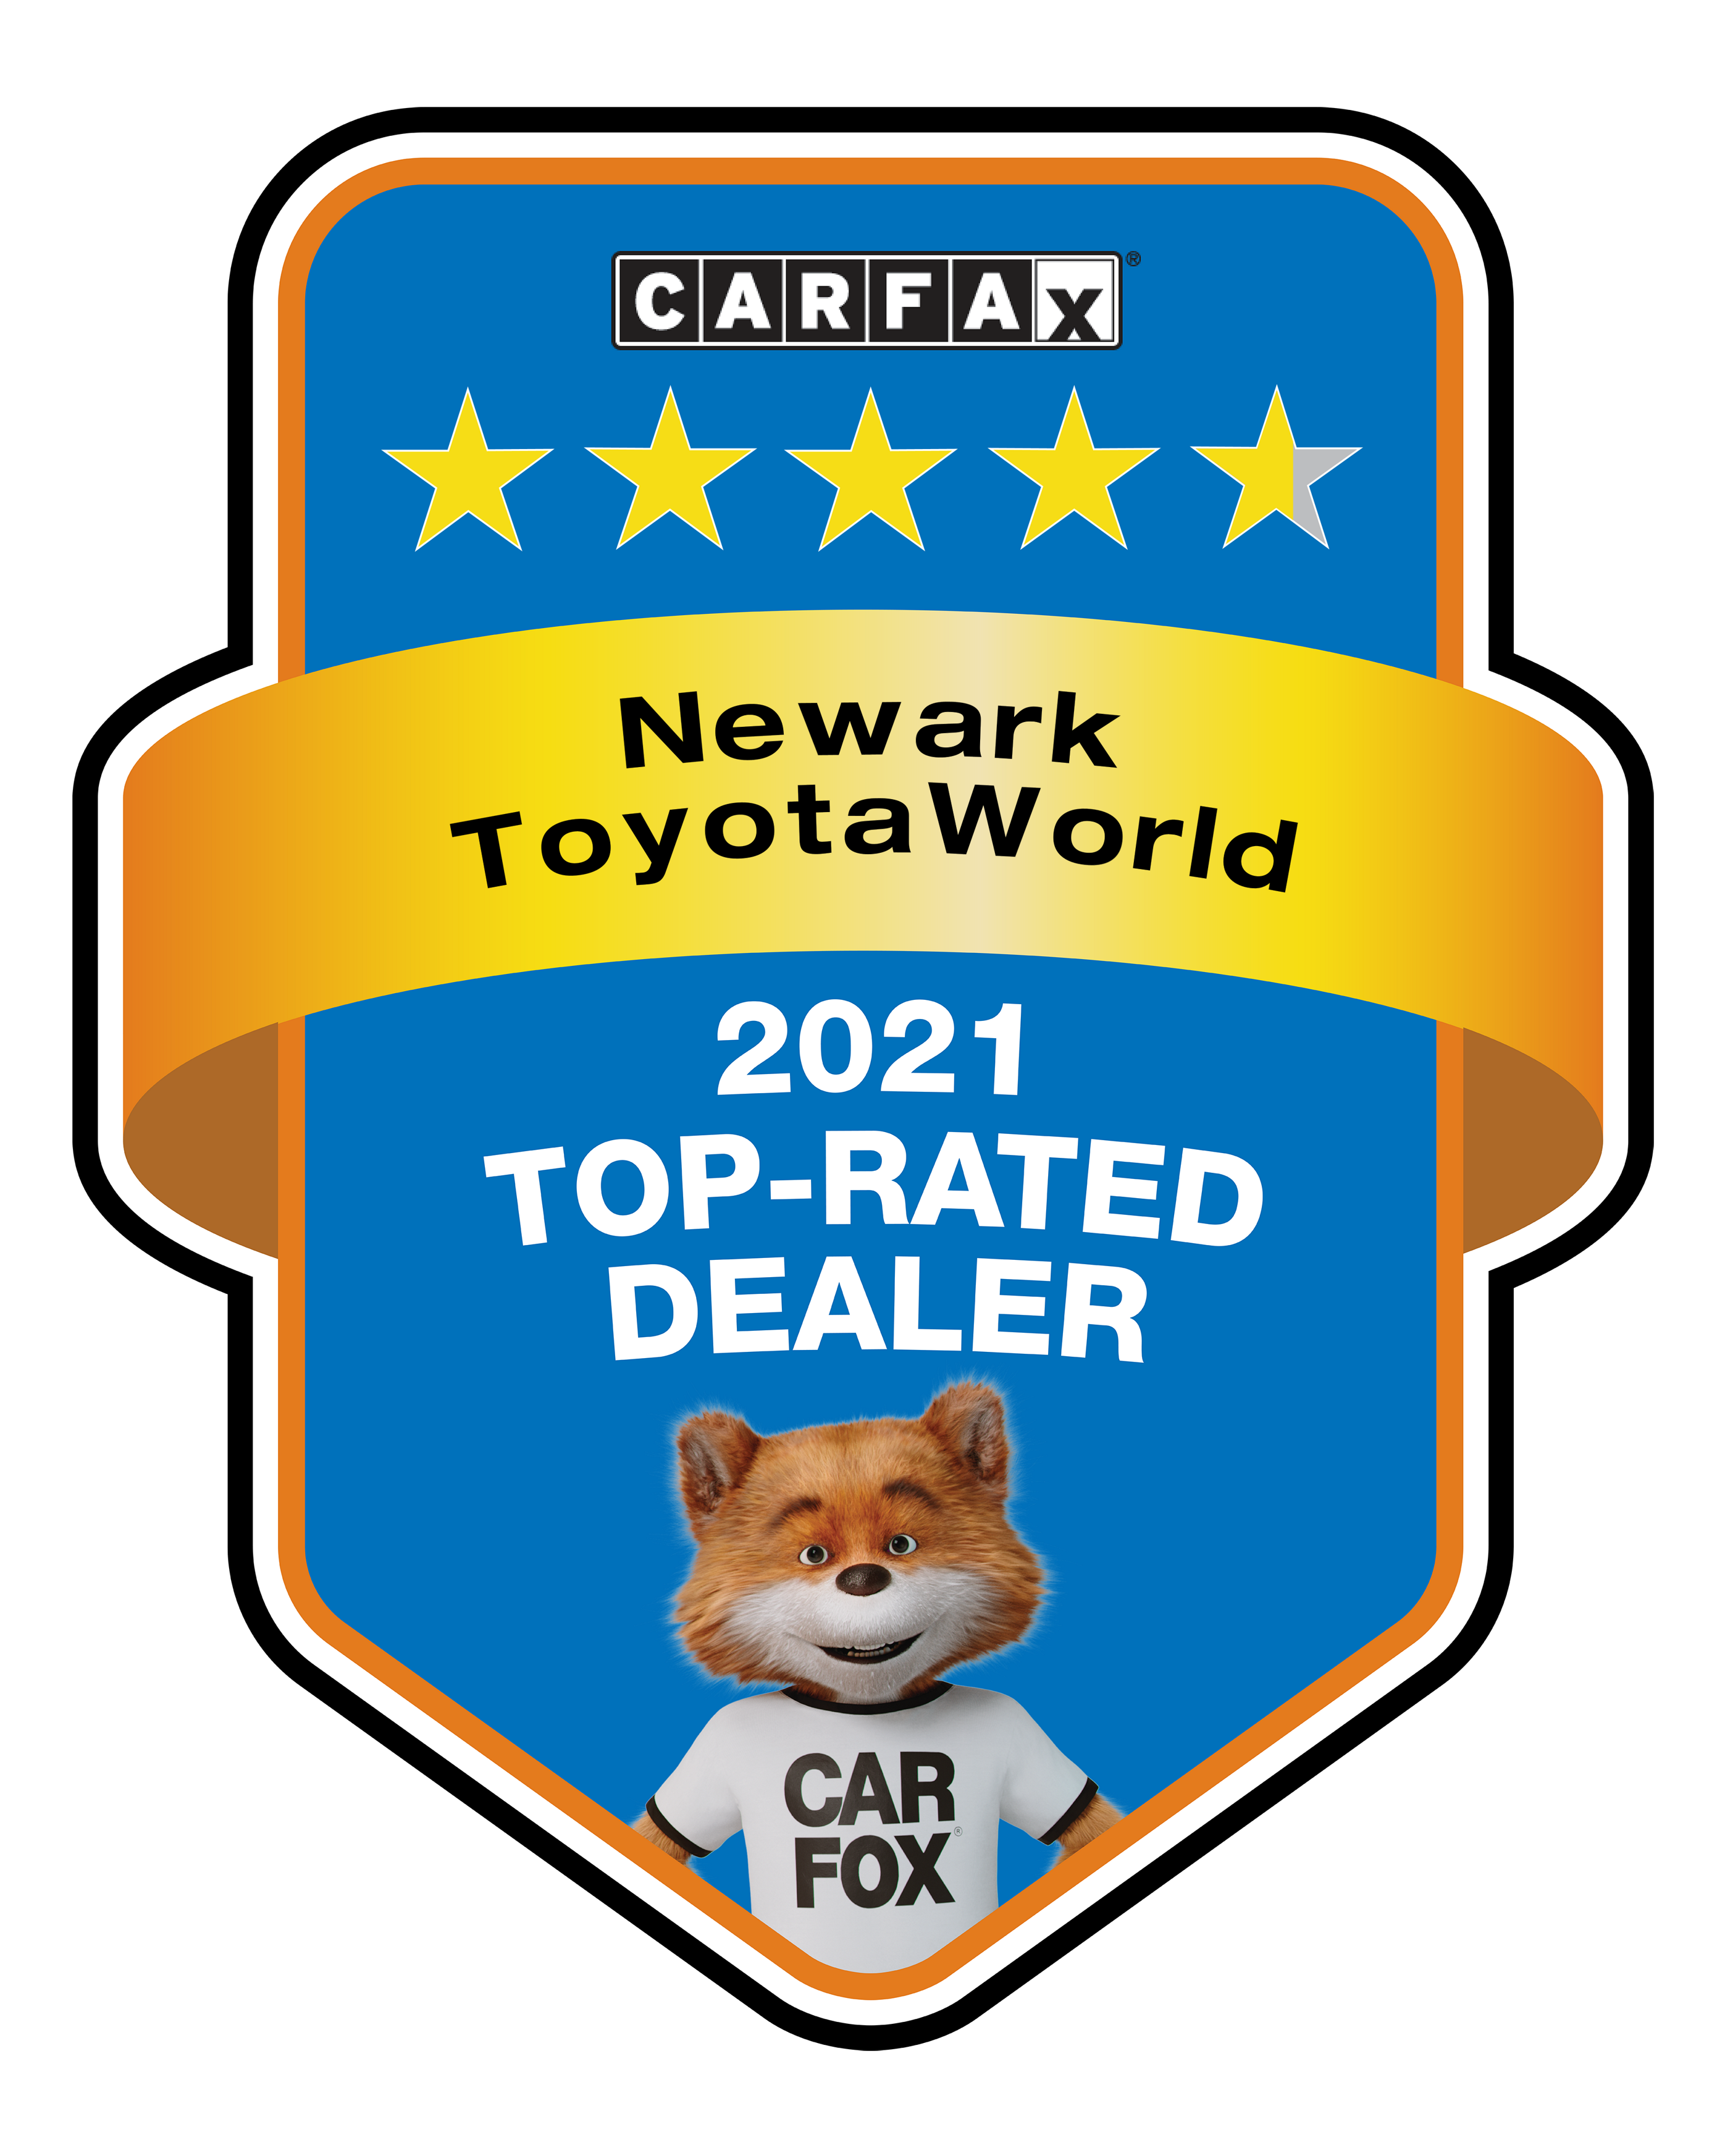 2021 Carfax Award for Used Cars and Service near Delaware, at Newark ToyotaWorld